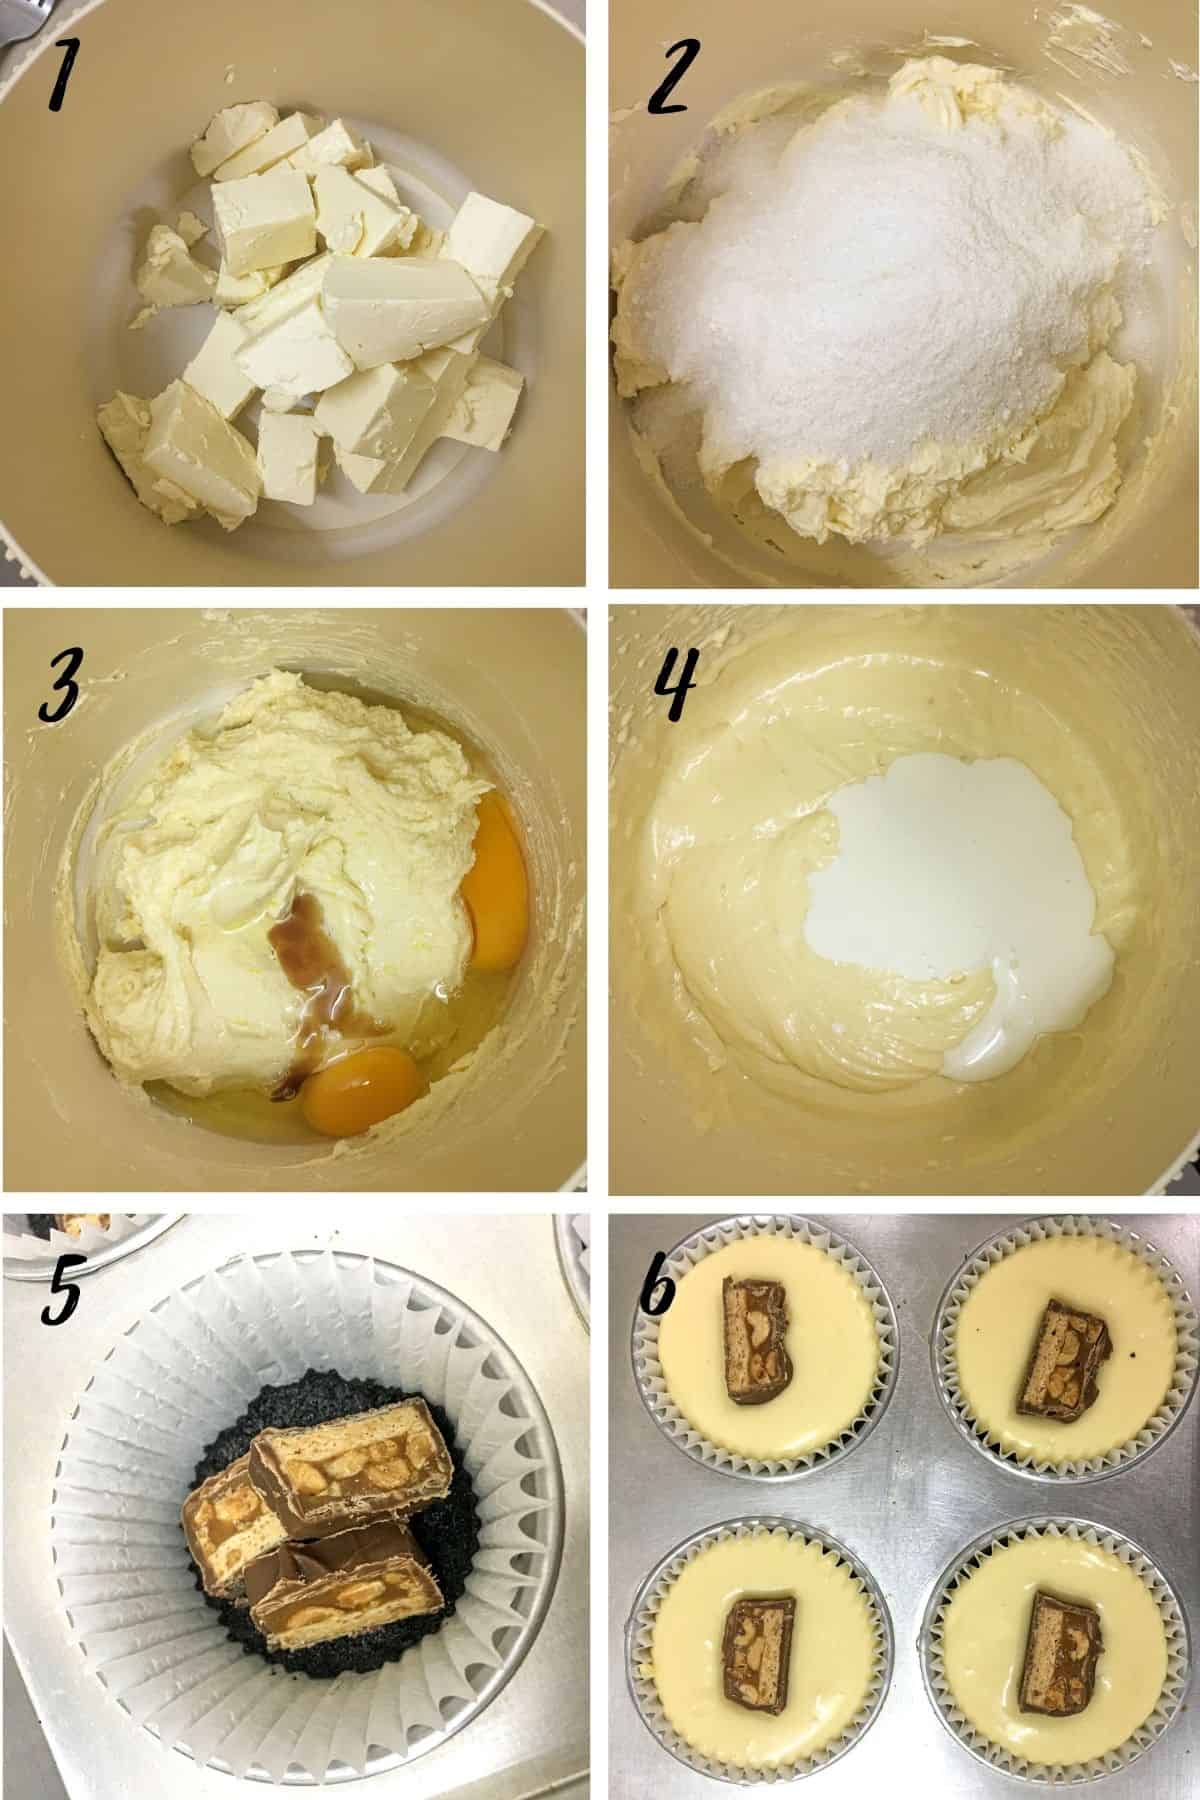 A poster of 6 images showing how to make Snickers cheesecake batter